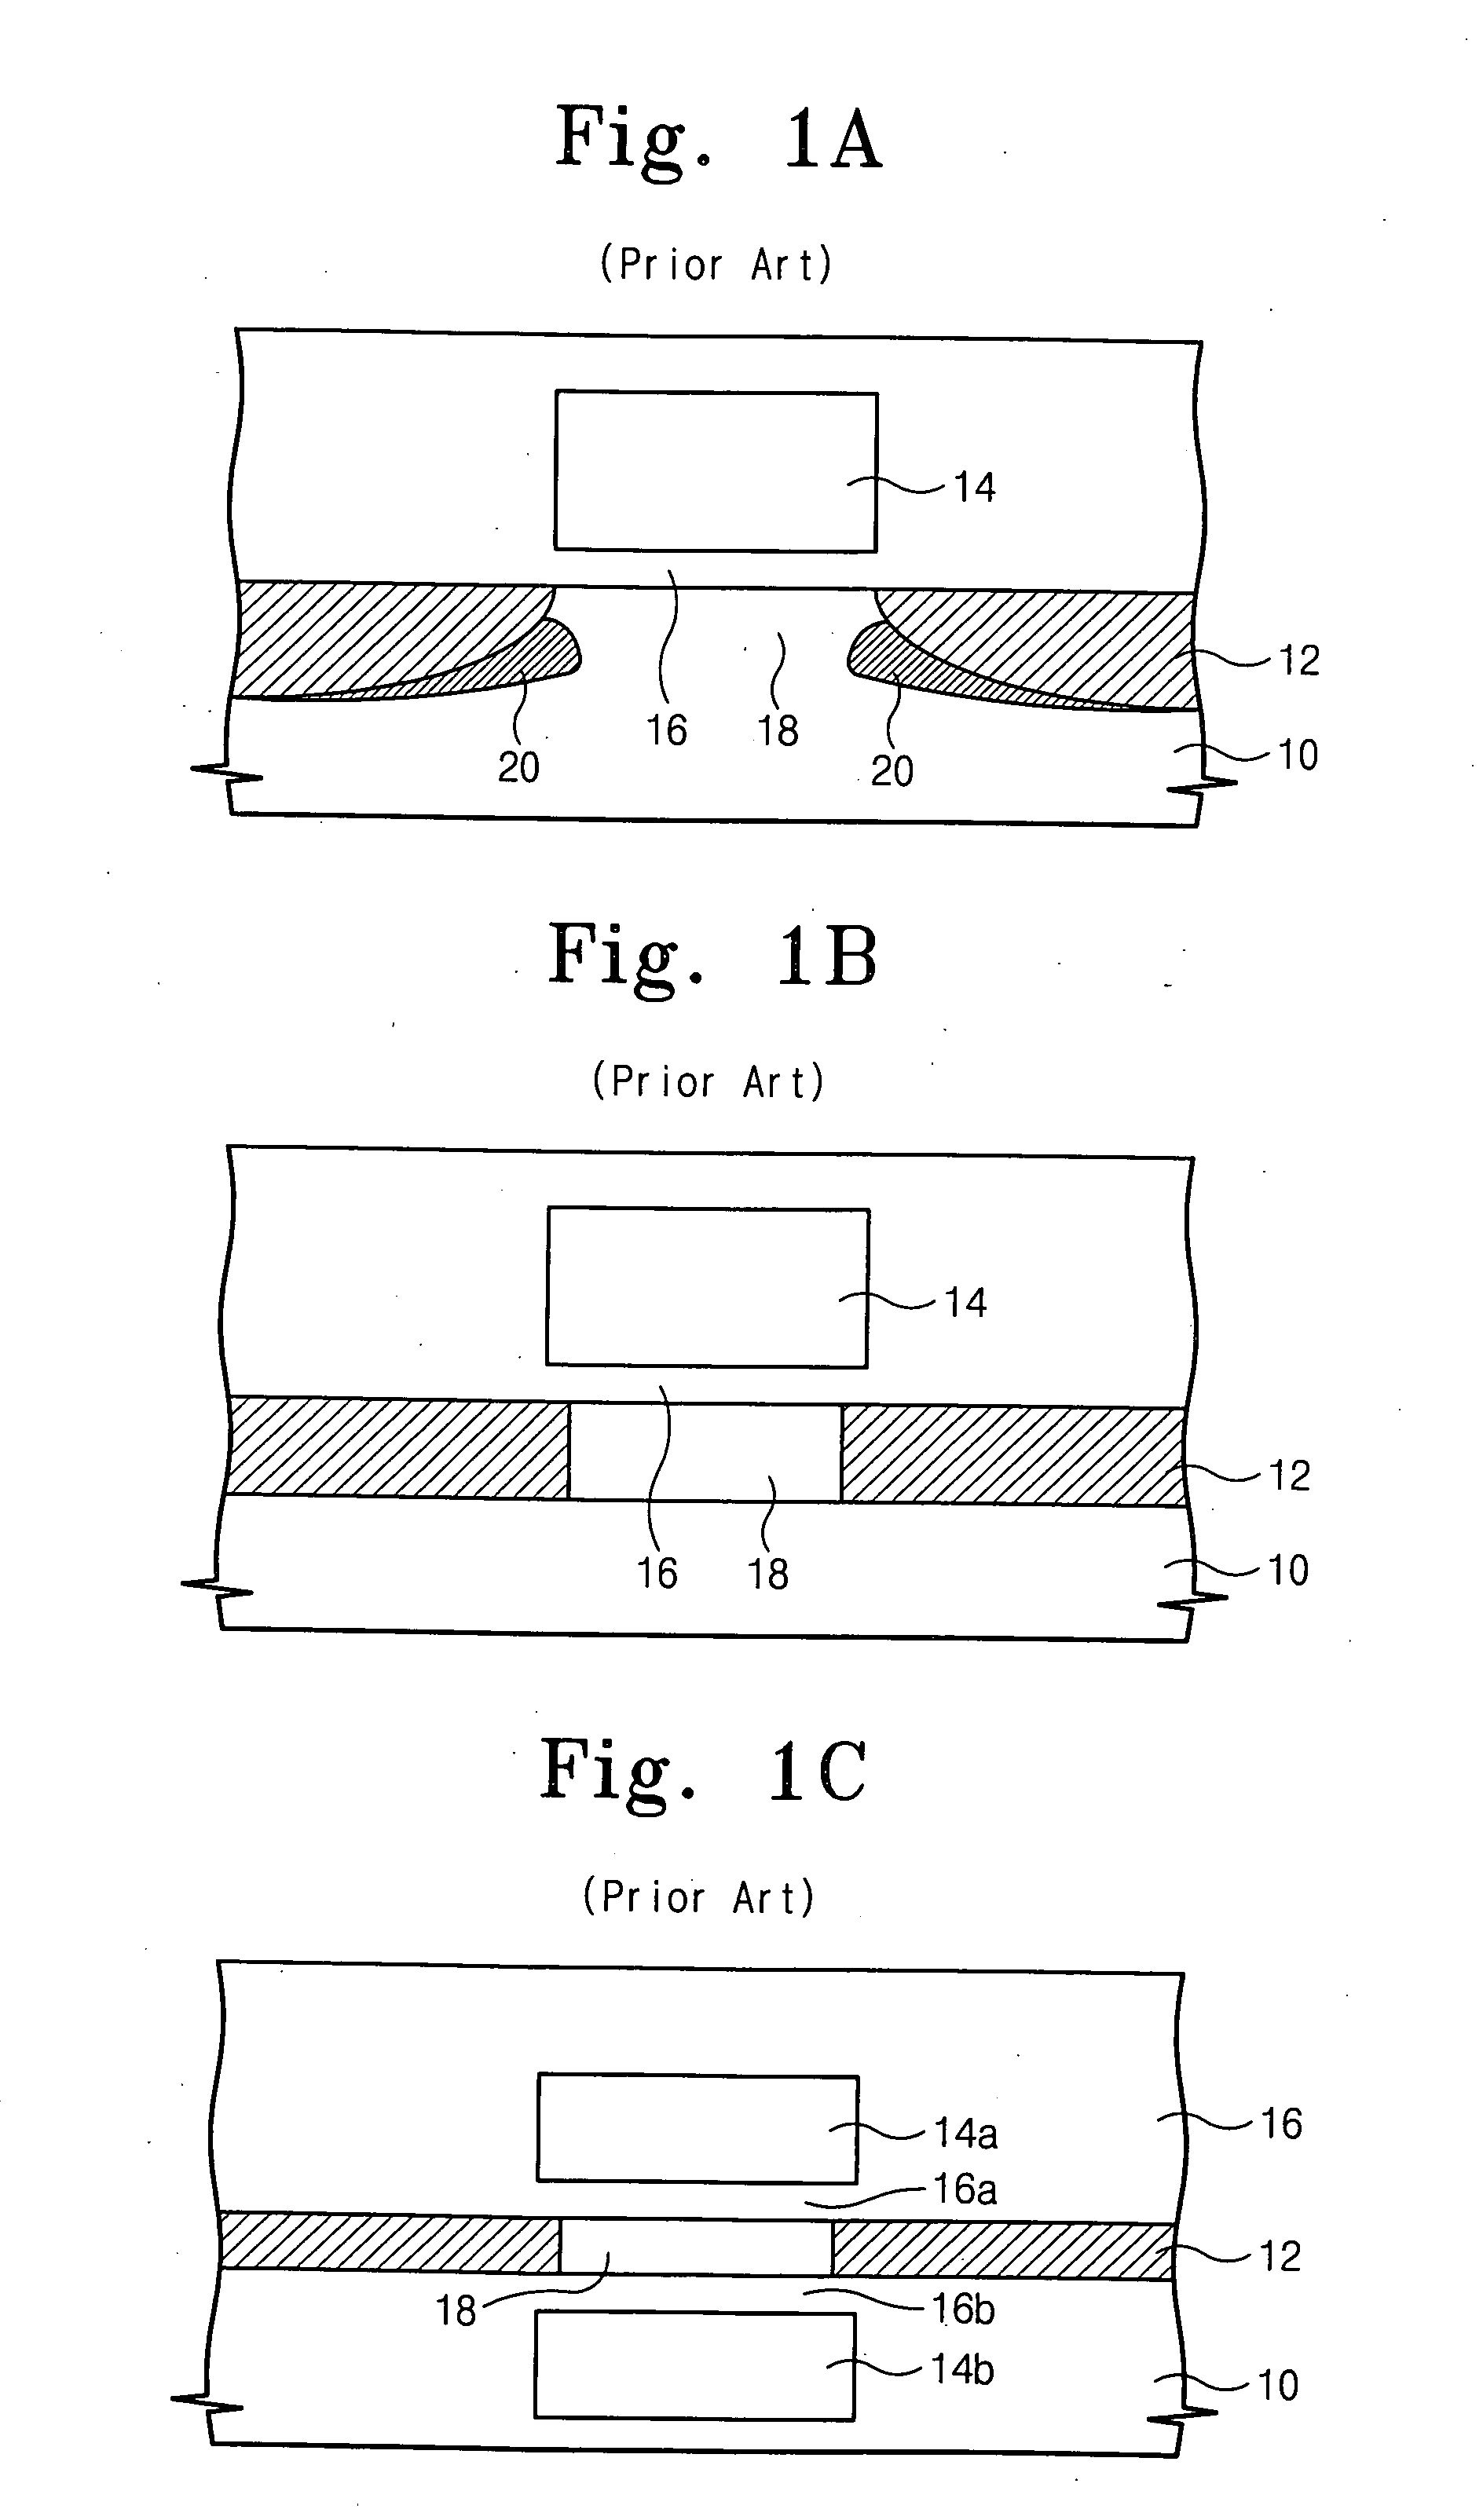 Methods of forming non-volatile semiconductor memory devices using prominences and trenches, and devices so formed